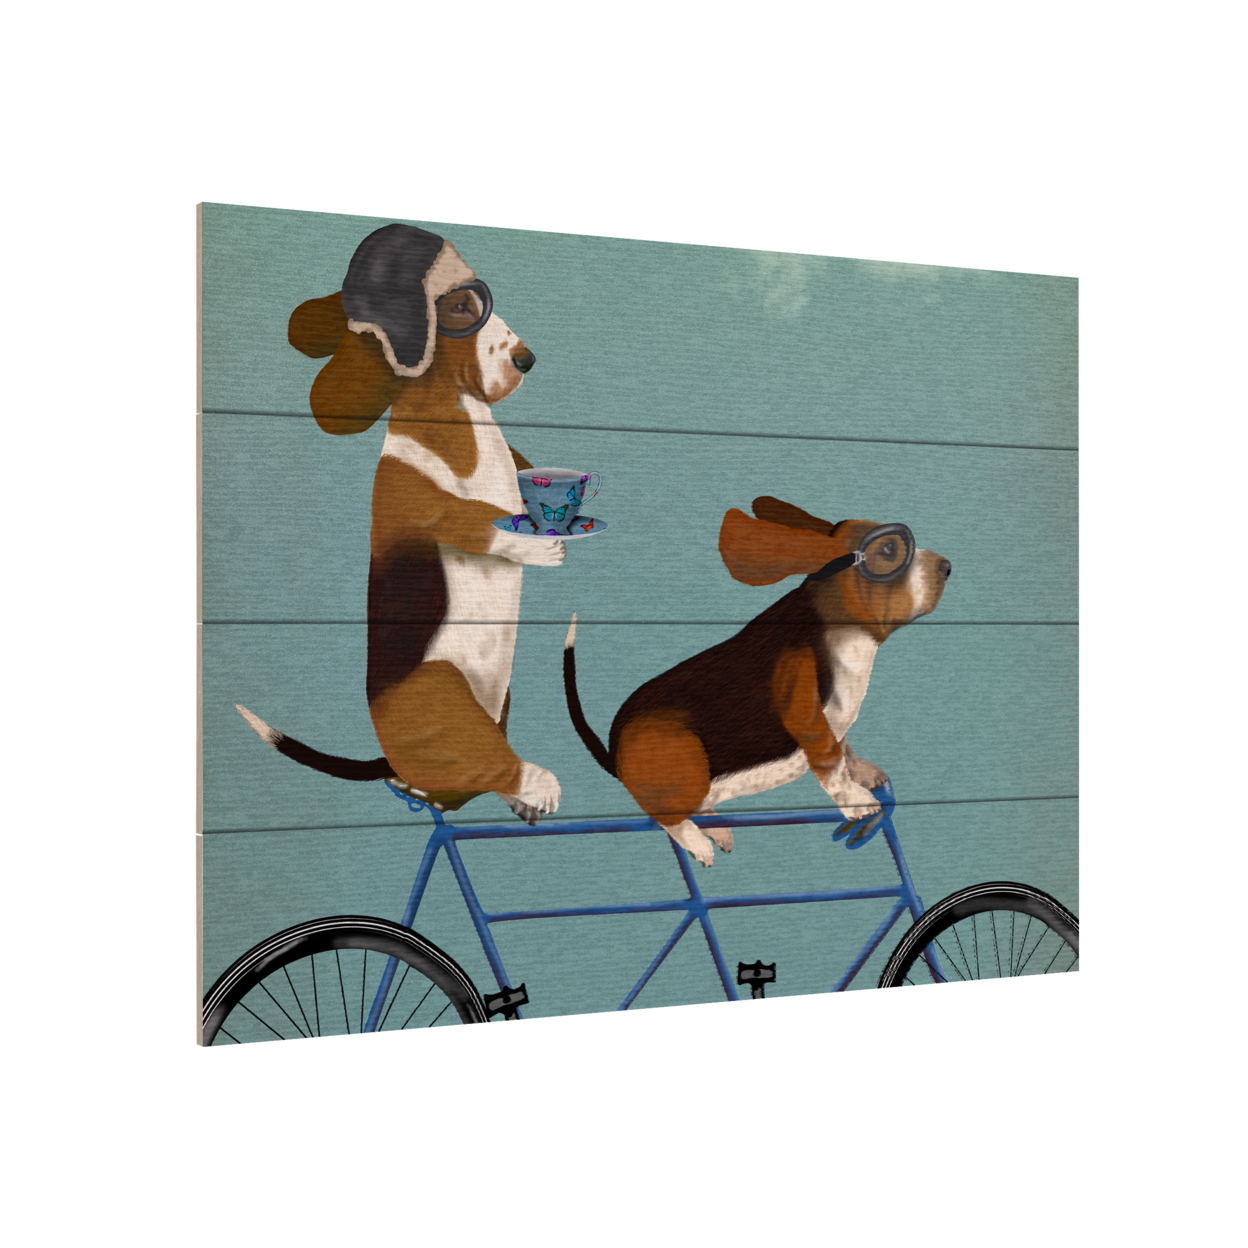 Wall Art 12 X 16 Inches Titled Basset Hound Tandem Ready To Hang Printed On Wooden Planks